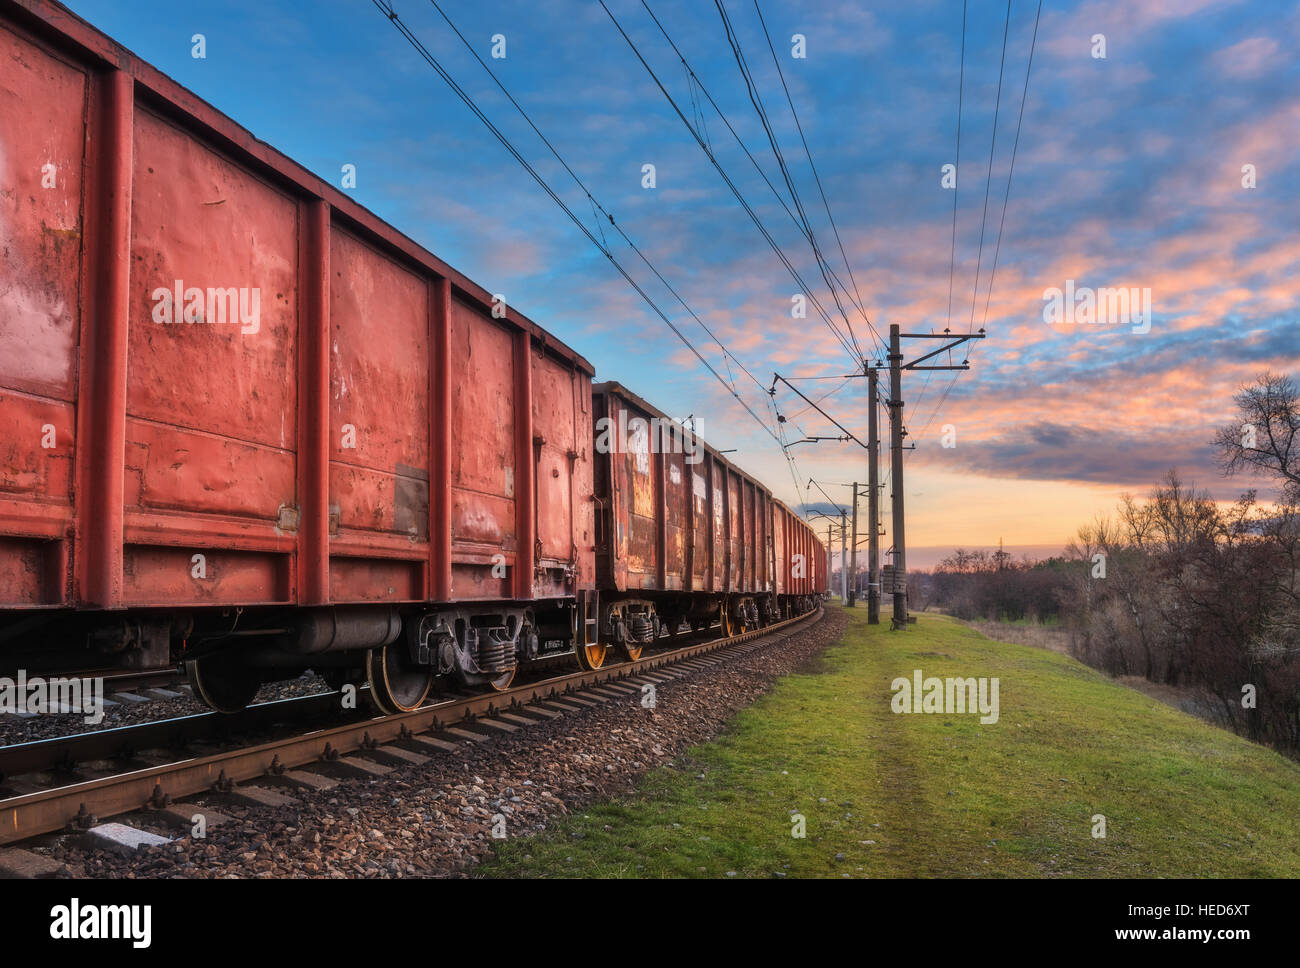 Railway station with cargo wagons and train against blue sky with clouds at sunset. Colorful industrial landscape. Railroad Stock Photo